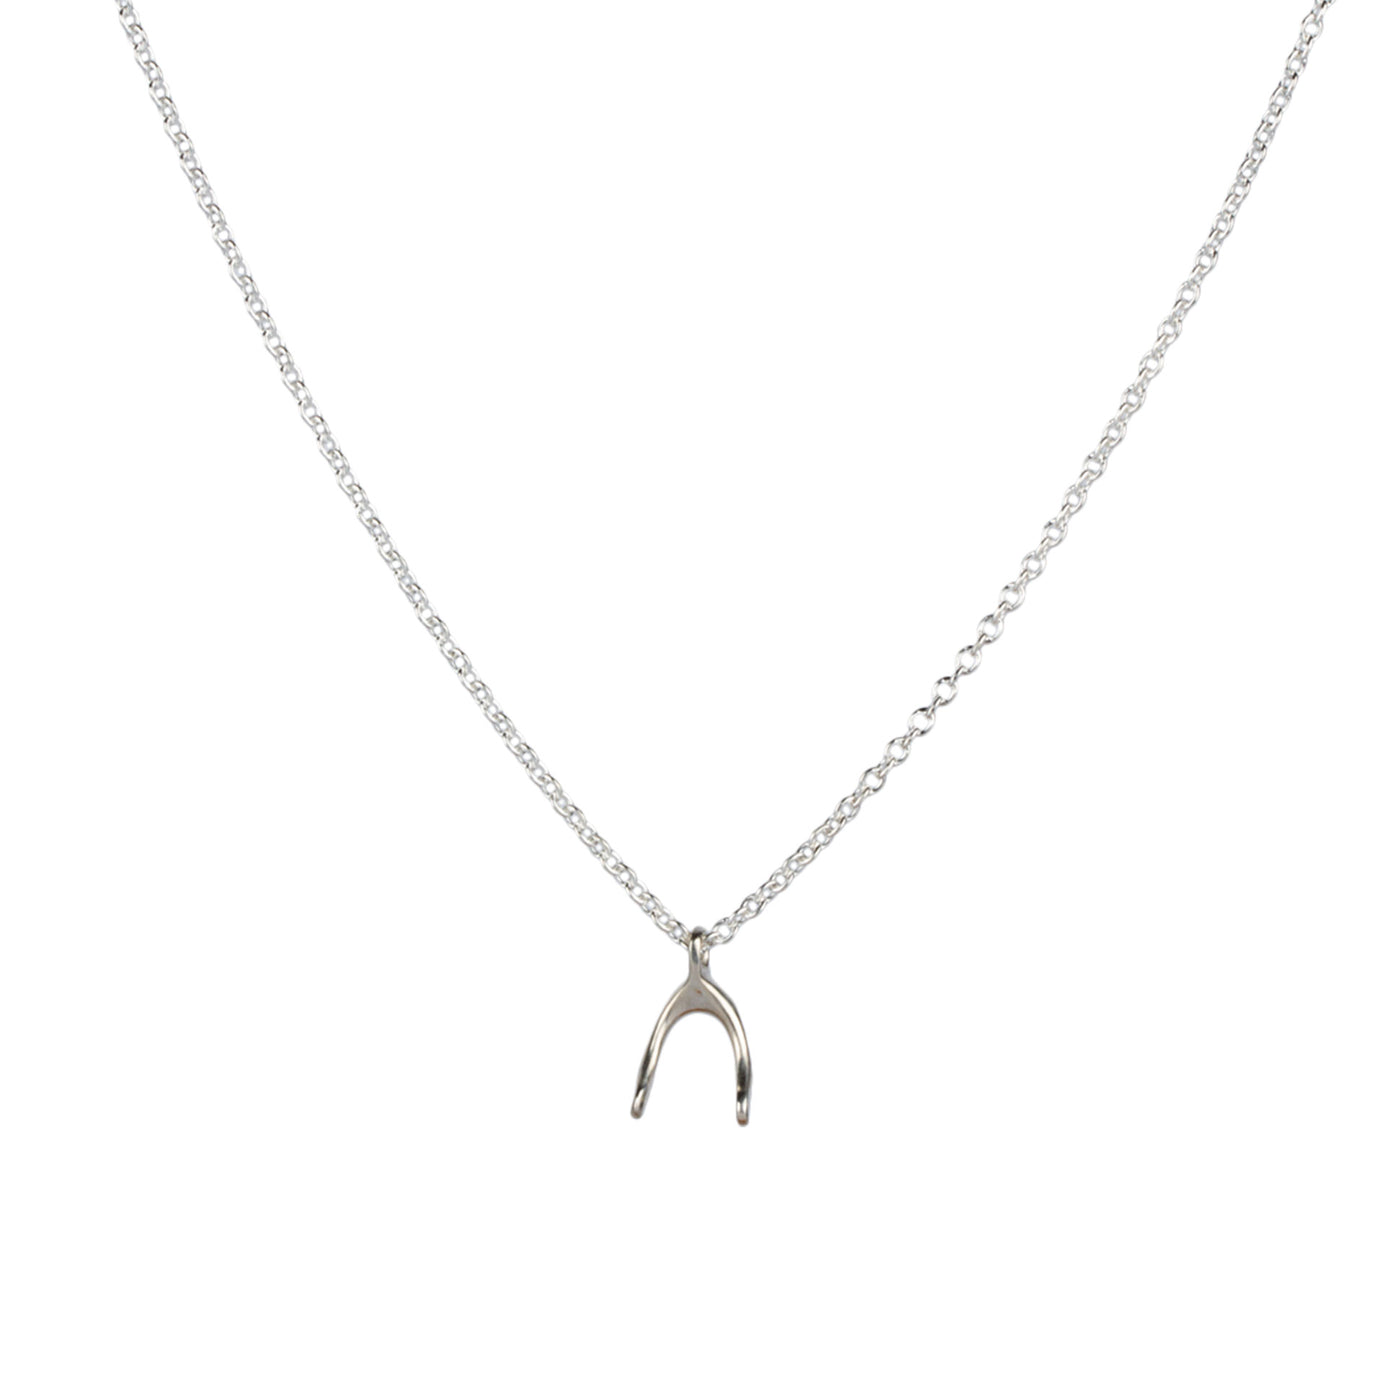 Silver Wishbone Necklace by Corey Egan on a white background